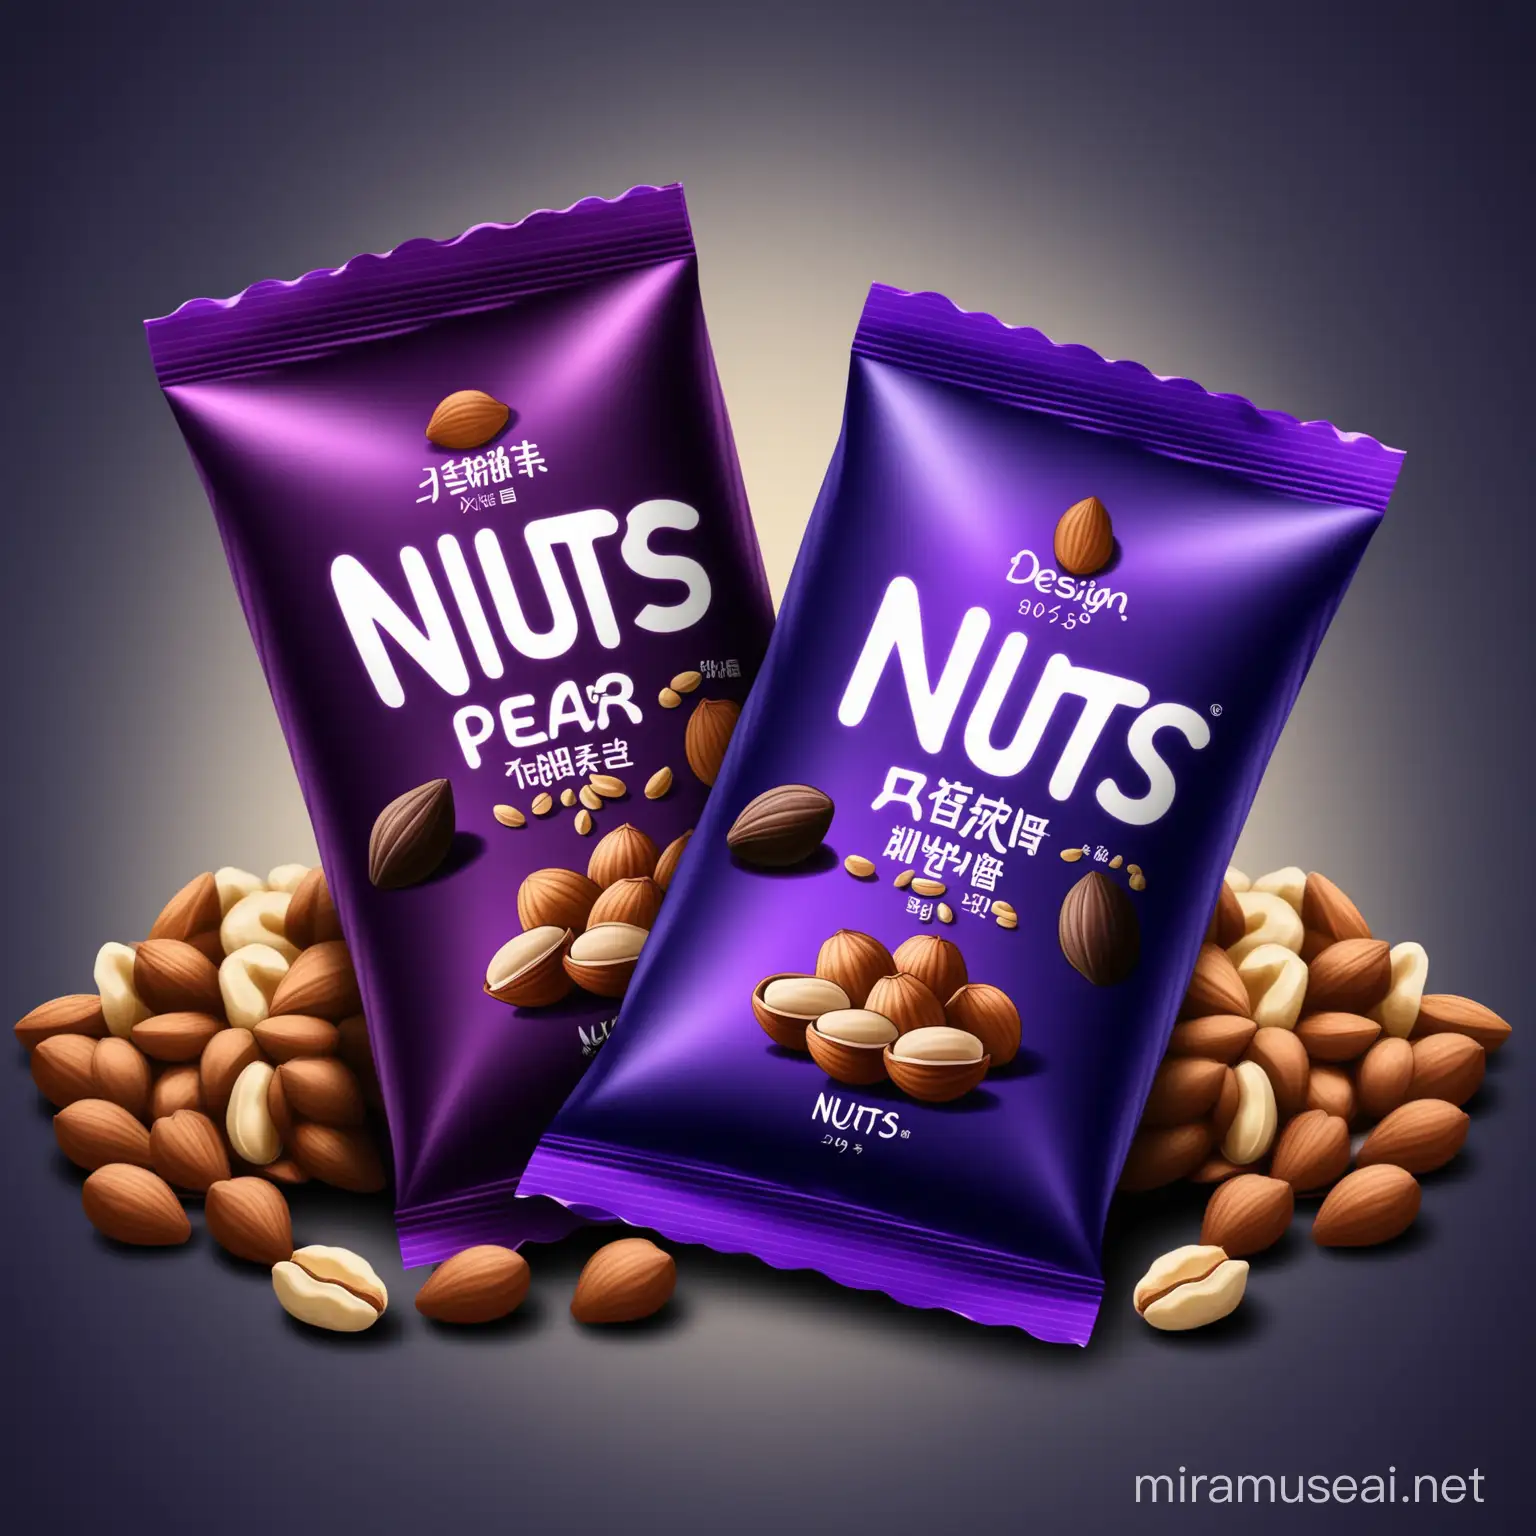 Plz design of wrapper package of nuts 30 g size, dark colors include dark purple and dark blue, 